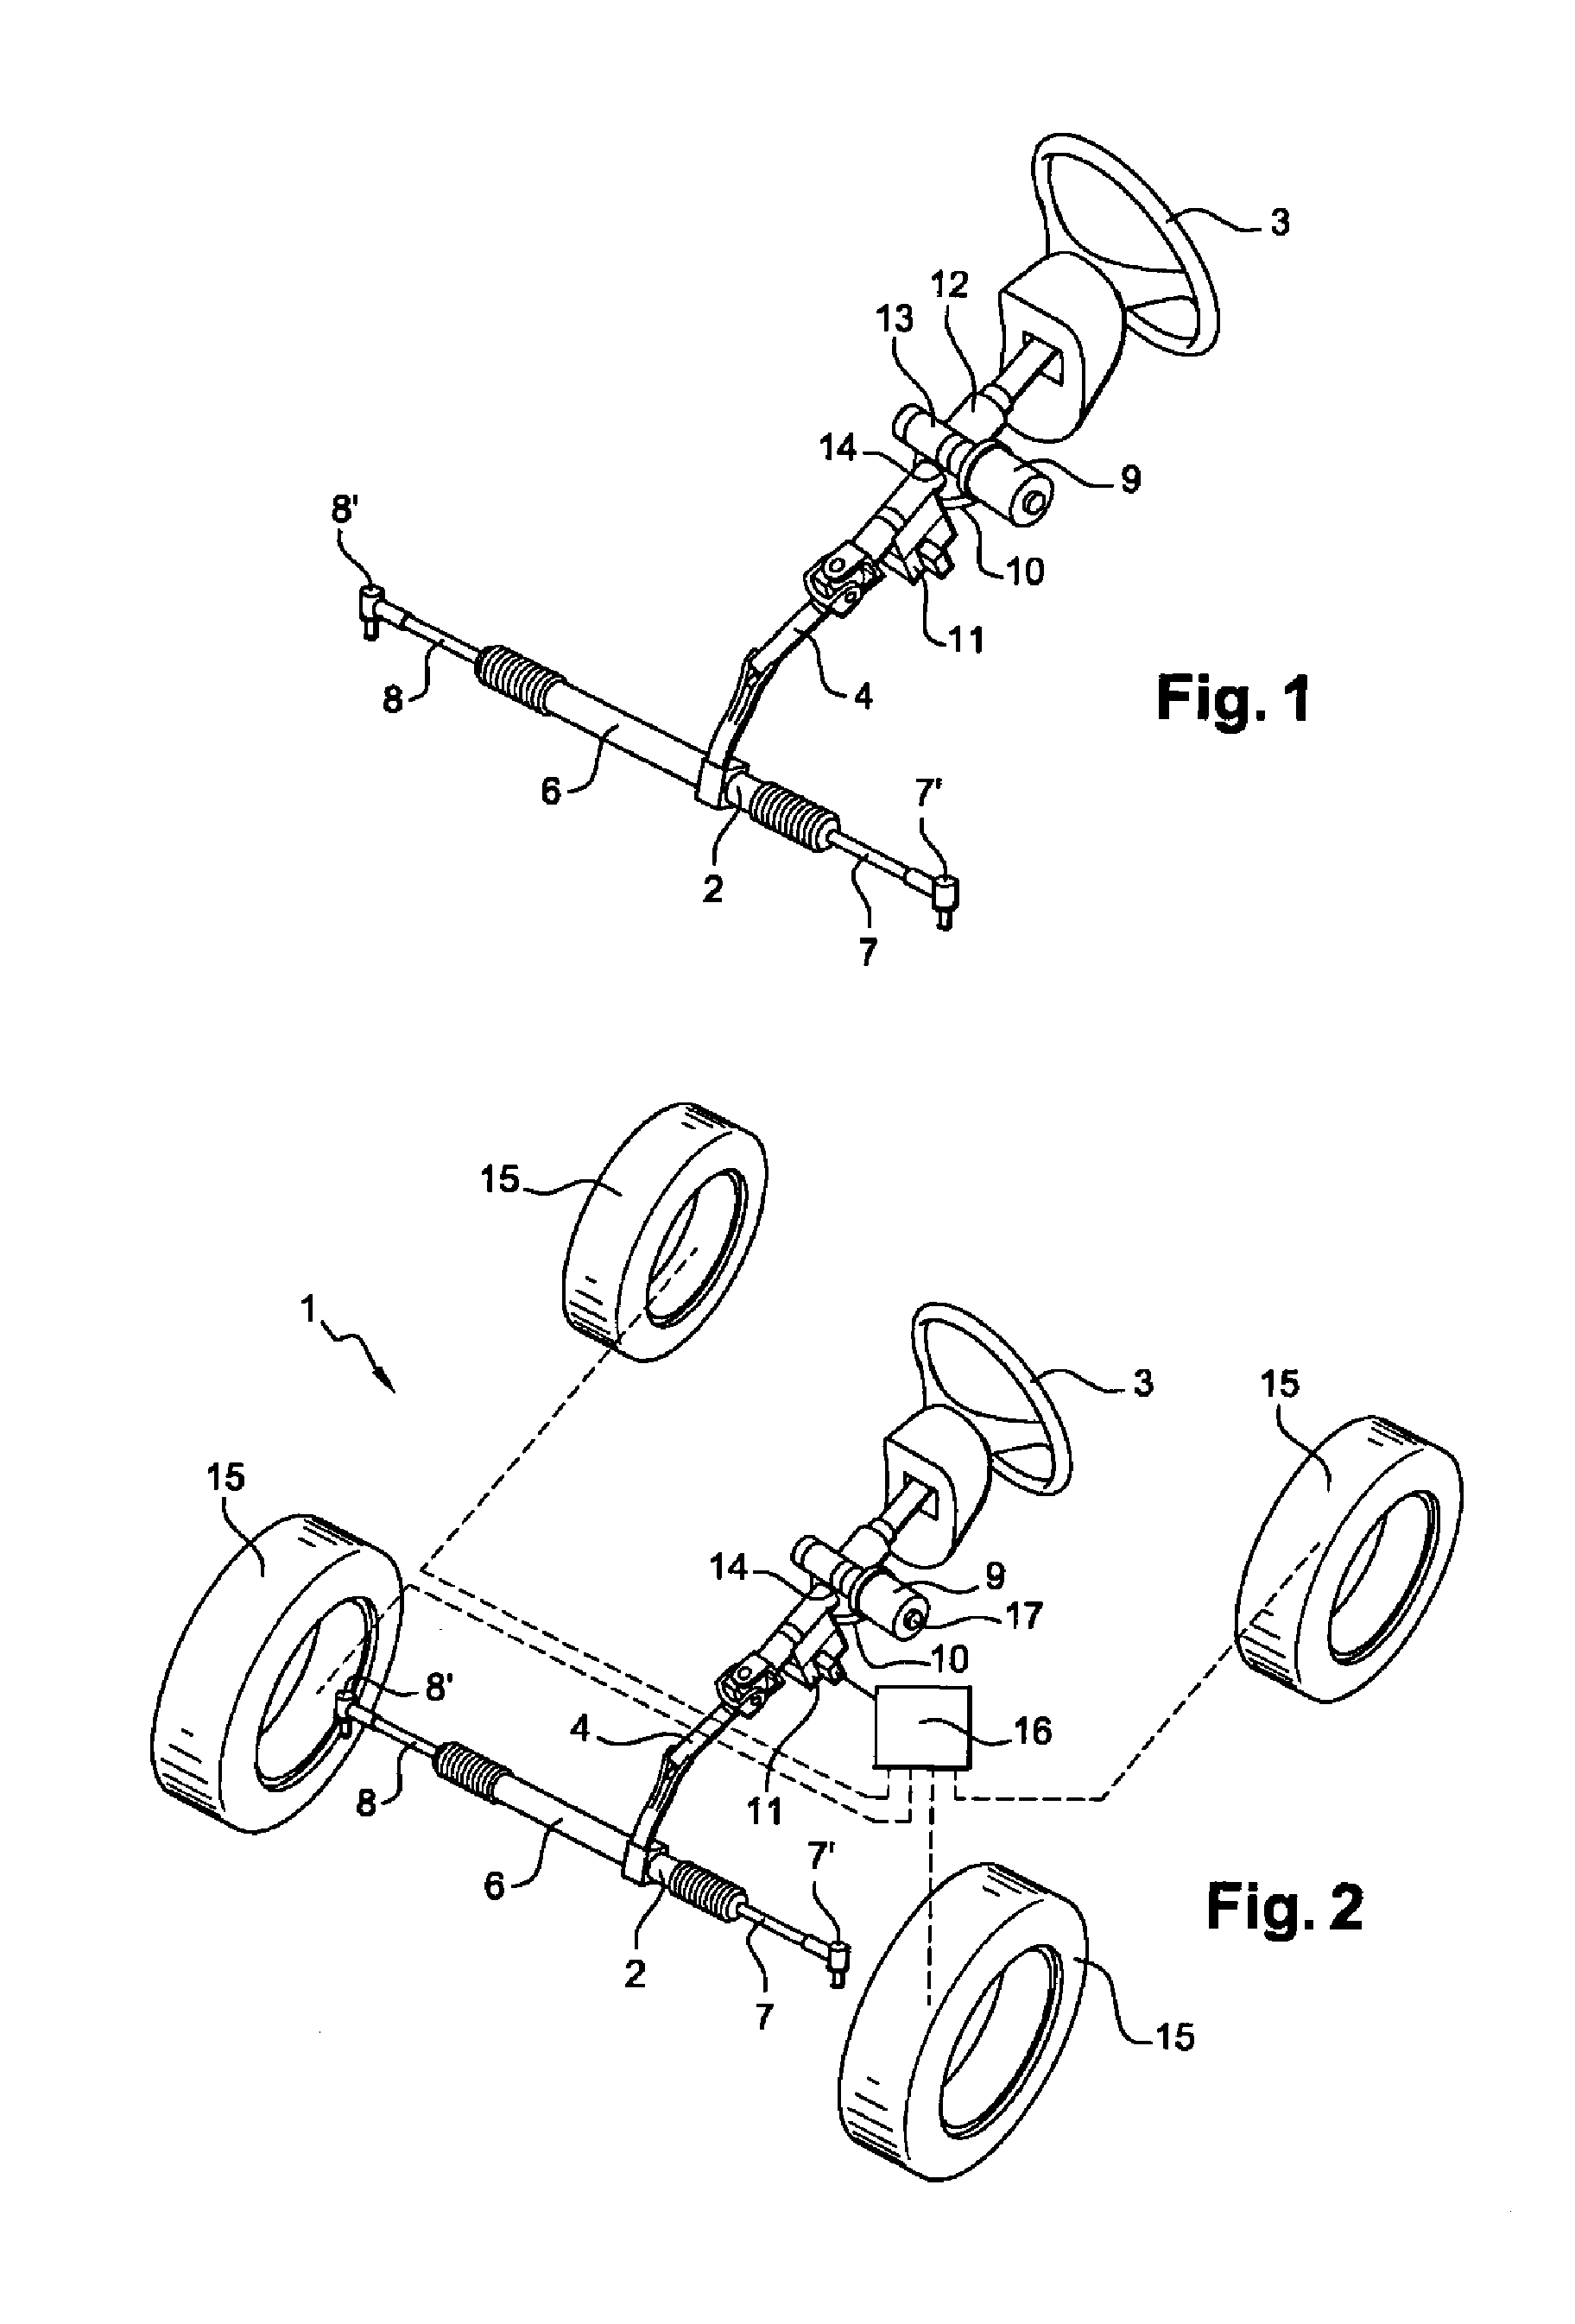 Method for determining the understeering ratio of a vehicle provided with electric power steering and for optionally correcting the power steering